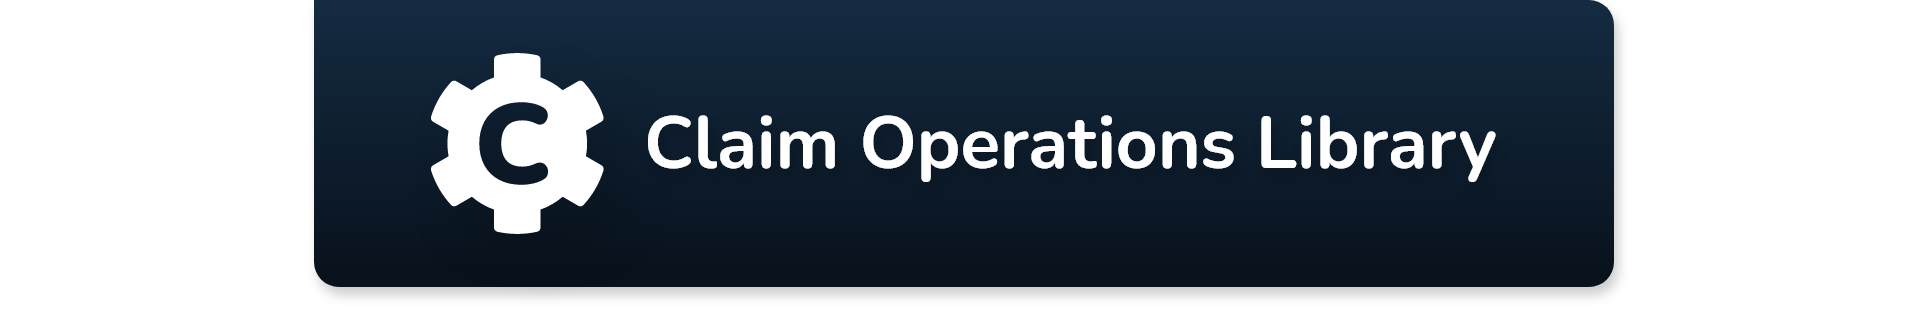 Claim Operations Library